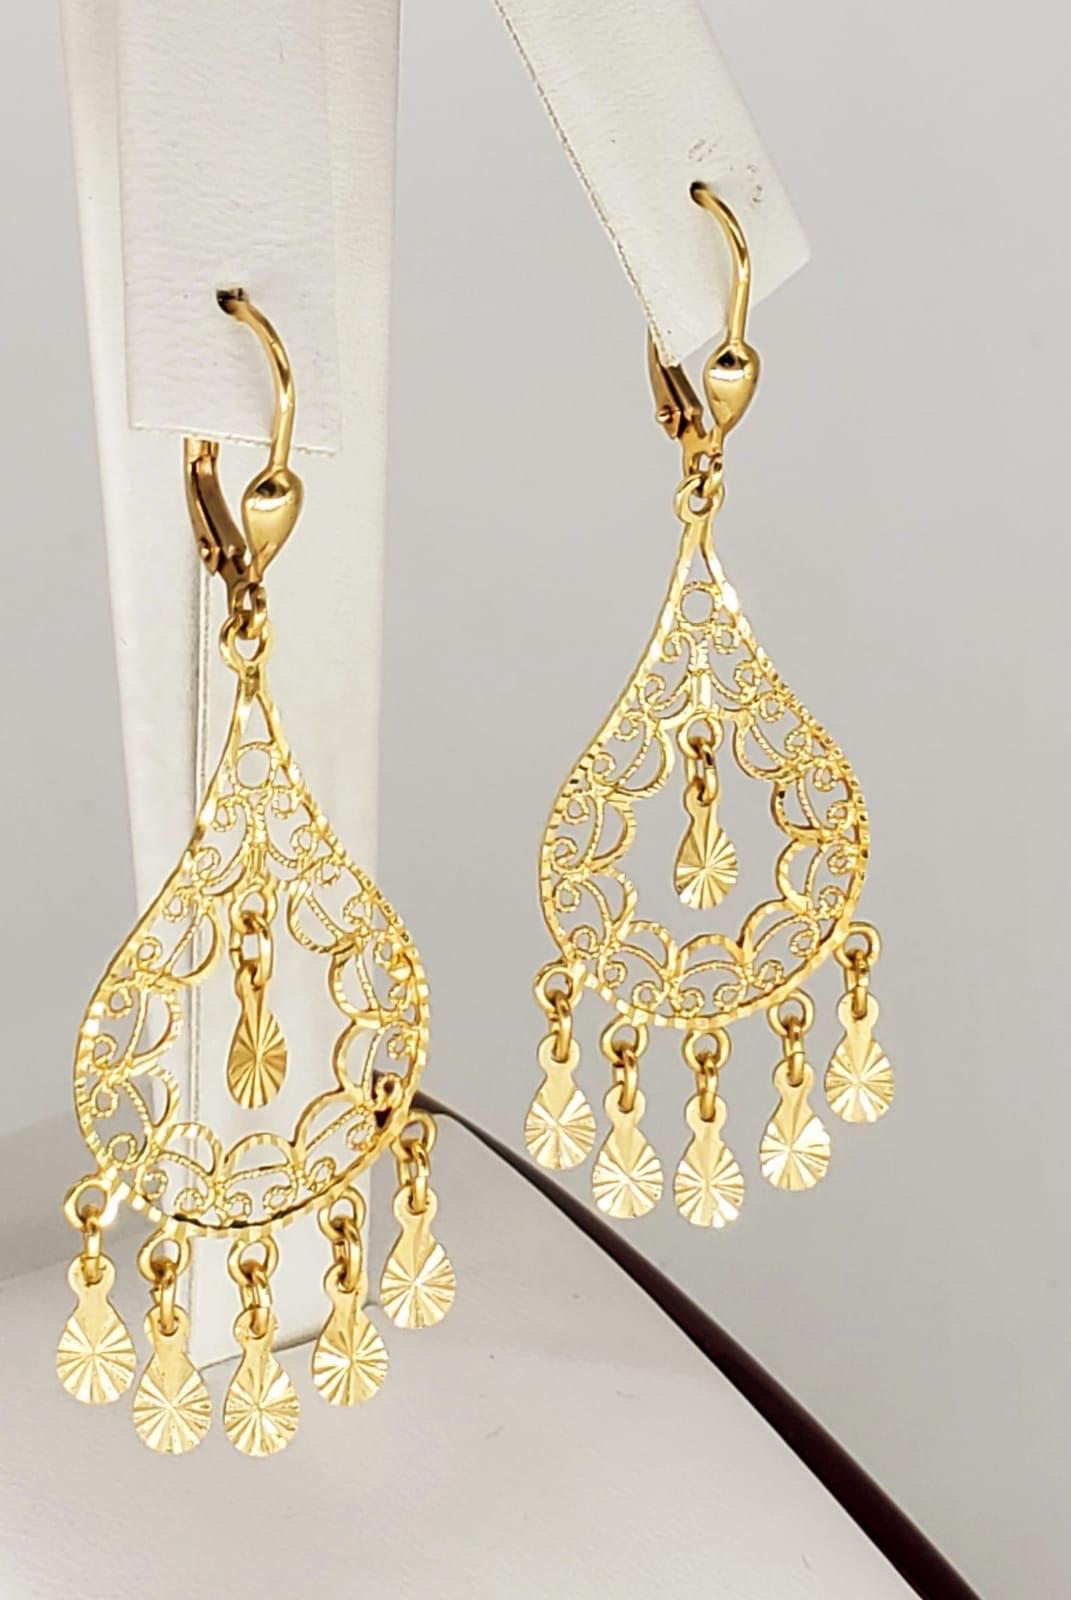 Vintage Diamond Cut Dangling Lever-Back Earrings. The earrings are beautiful and sparkle from all angles. The diamond cuts makes it unique and wry interesting piece while it’s dangling moving around so it reflects the shine from all angles. The